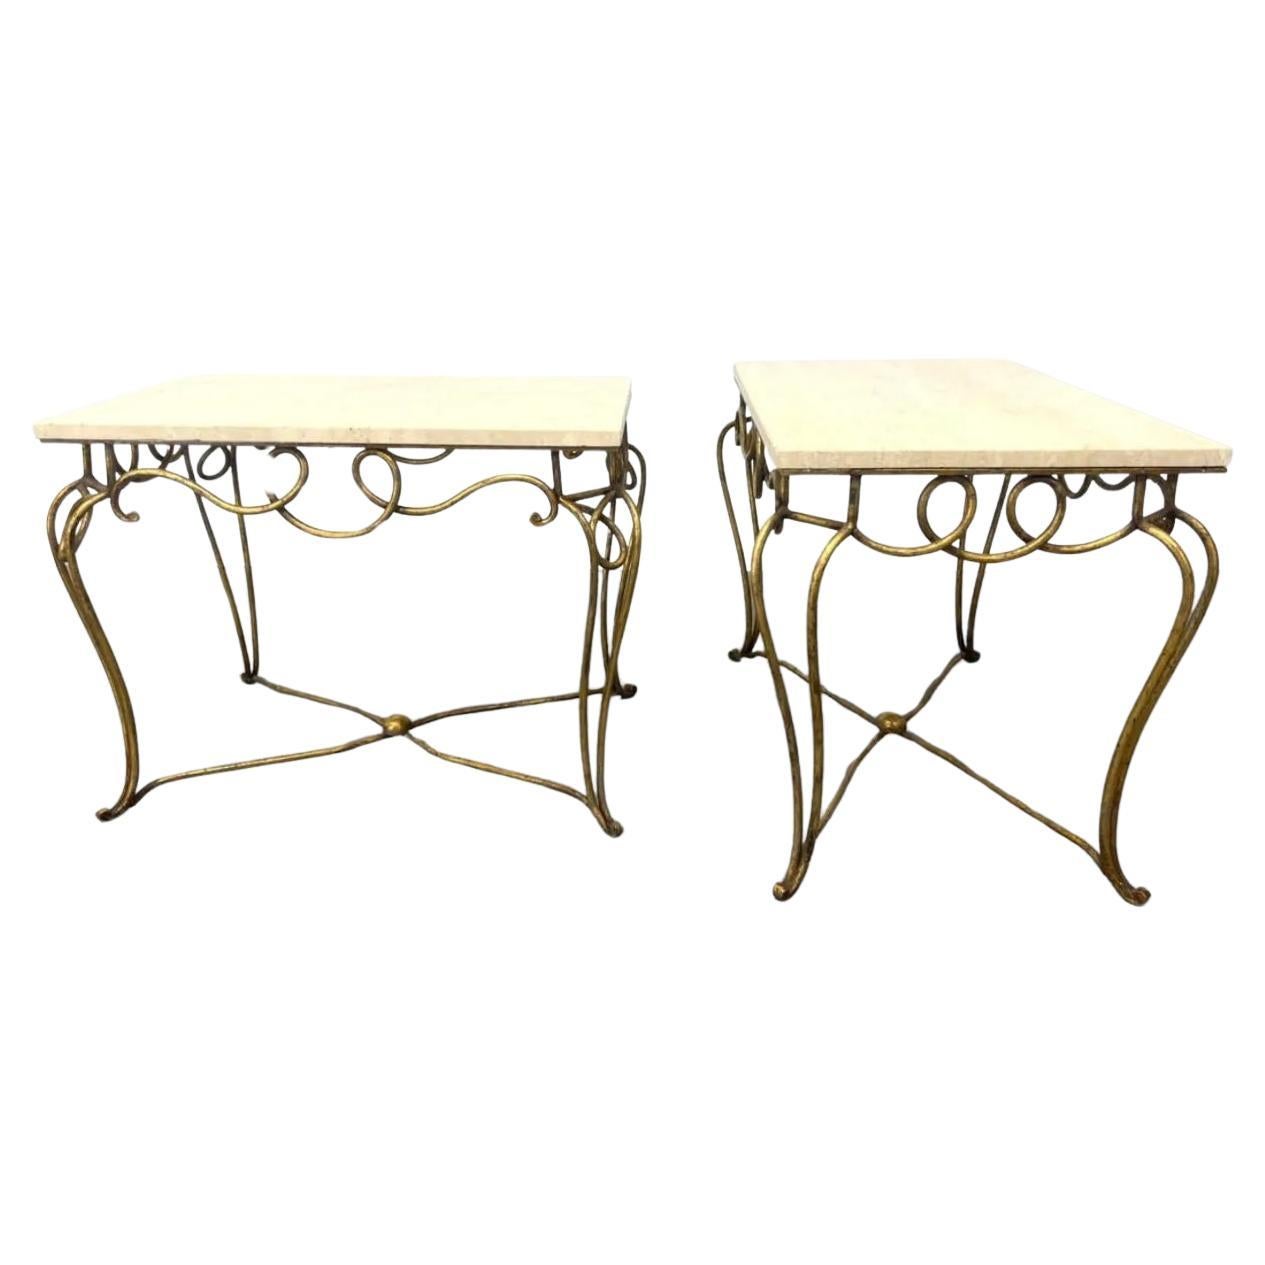 Midcentury French Rene Prou Art Deco Gilded Iron End Tables with Travertine Tops For Sale